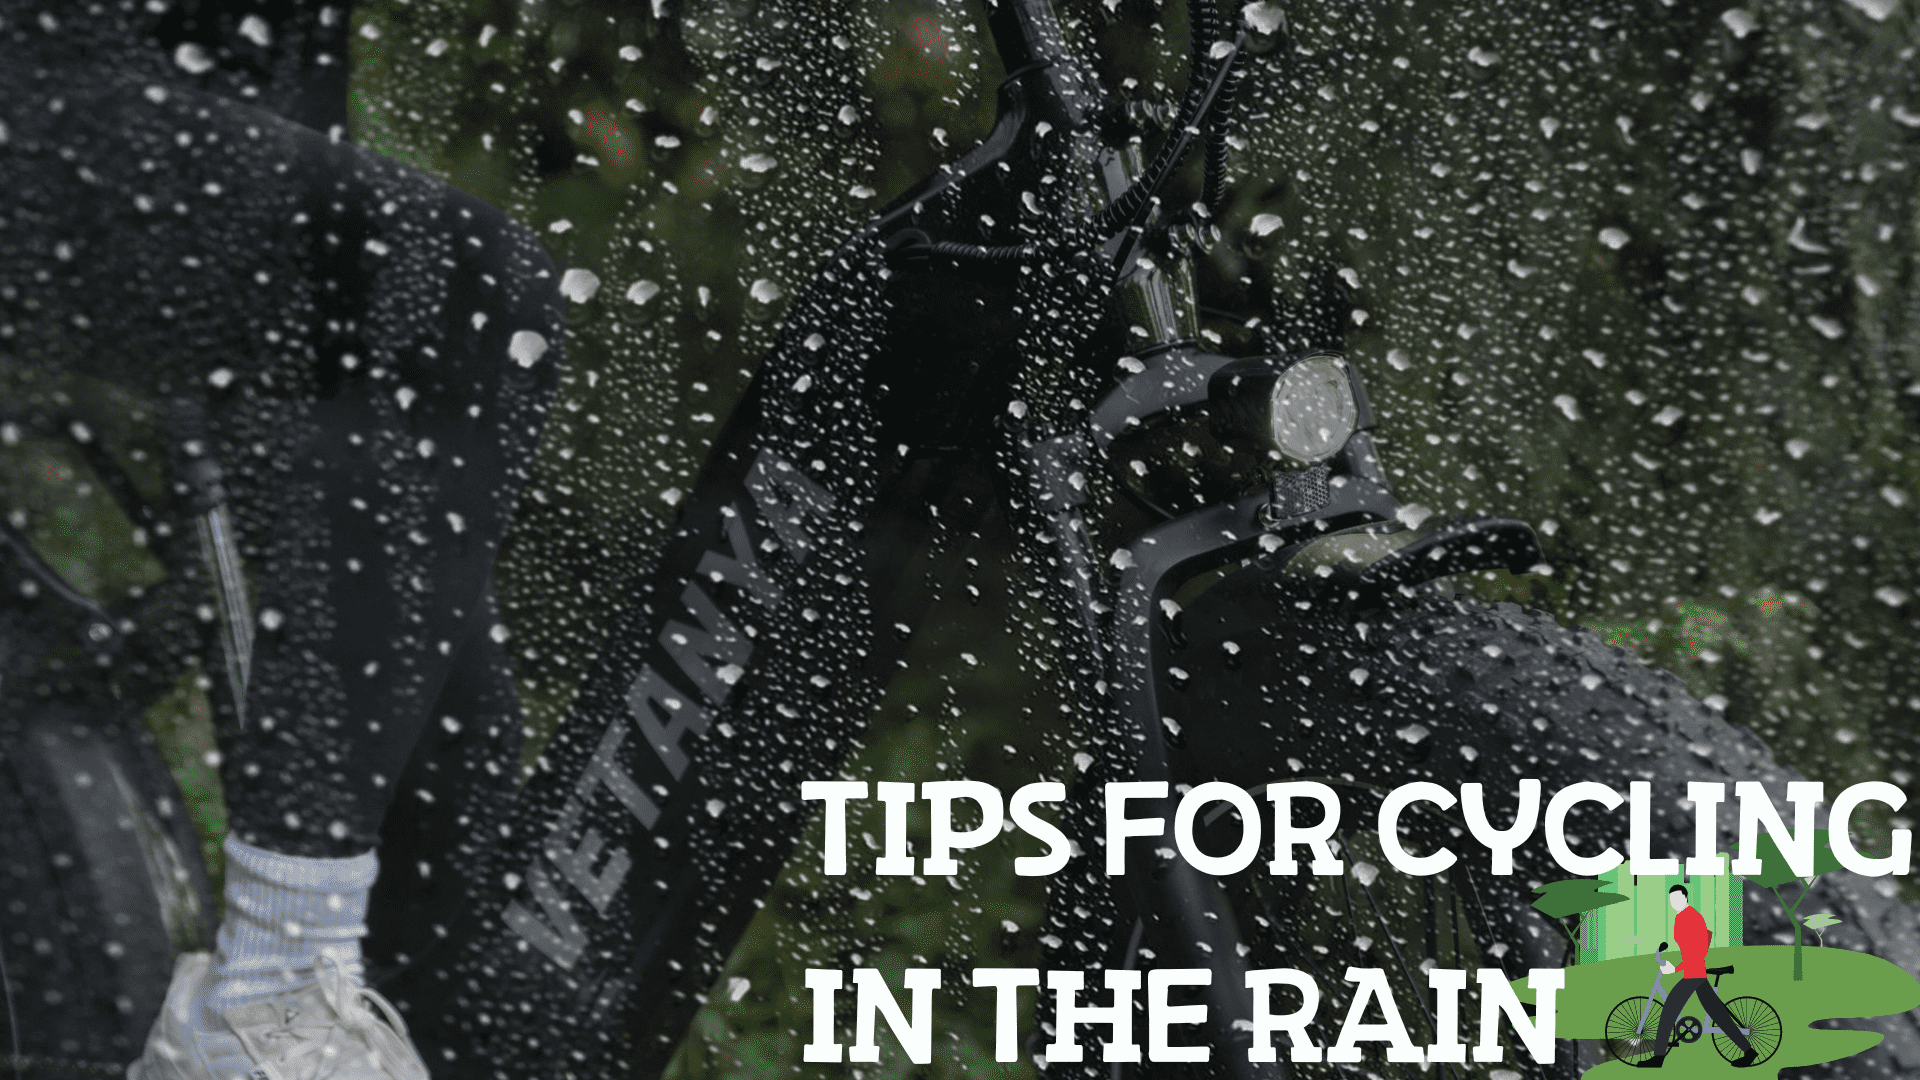 11 tips for cycling in the rain | how to stay safe and dry